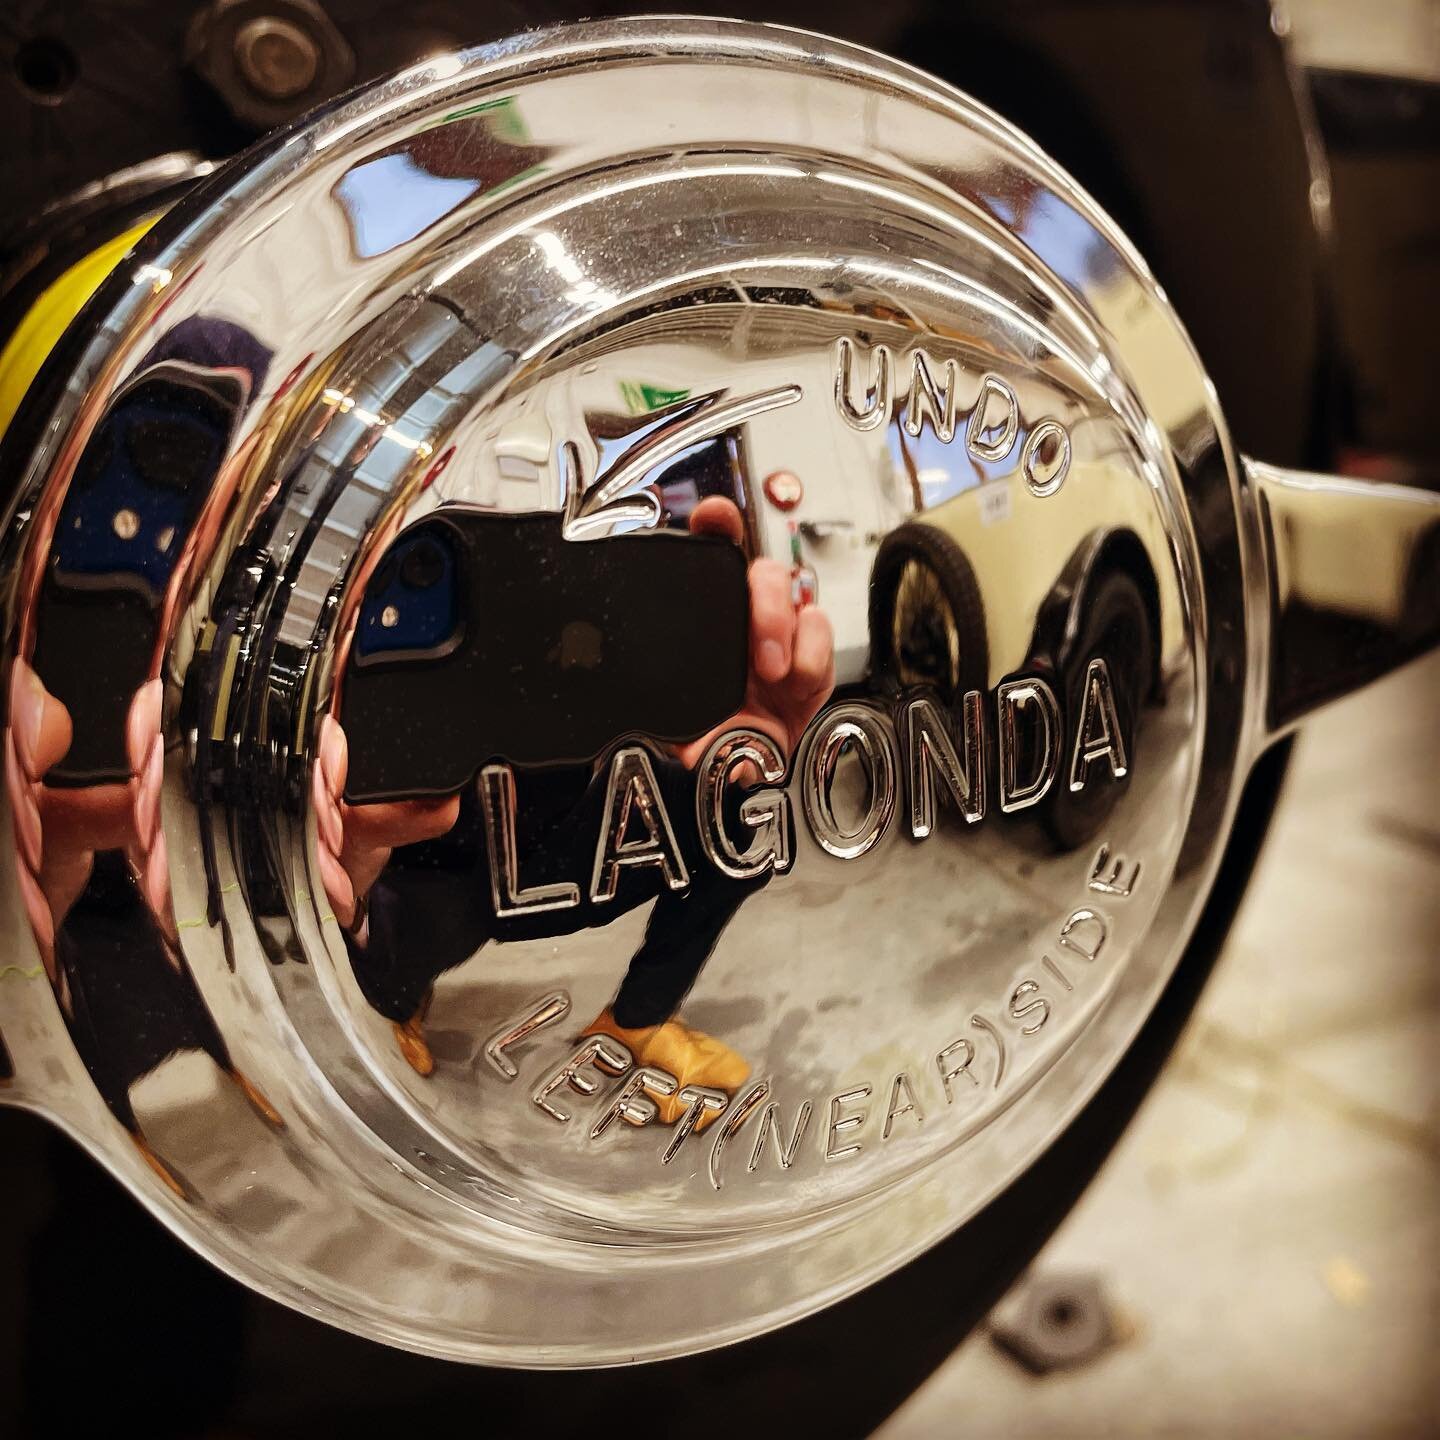 Beautiful Lagonda spinners on the 1939 V12 we are currently restoring #lagonda #spinners #lagondav12 #restoration #vintagecar #details